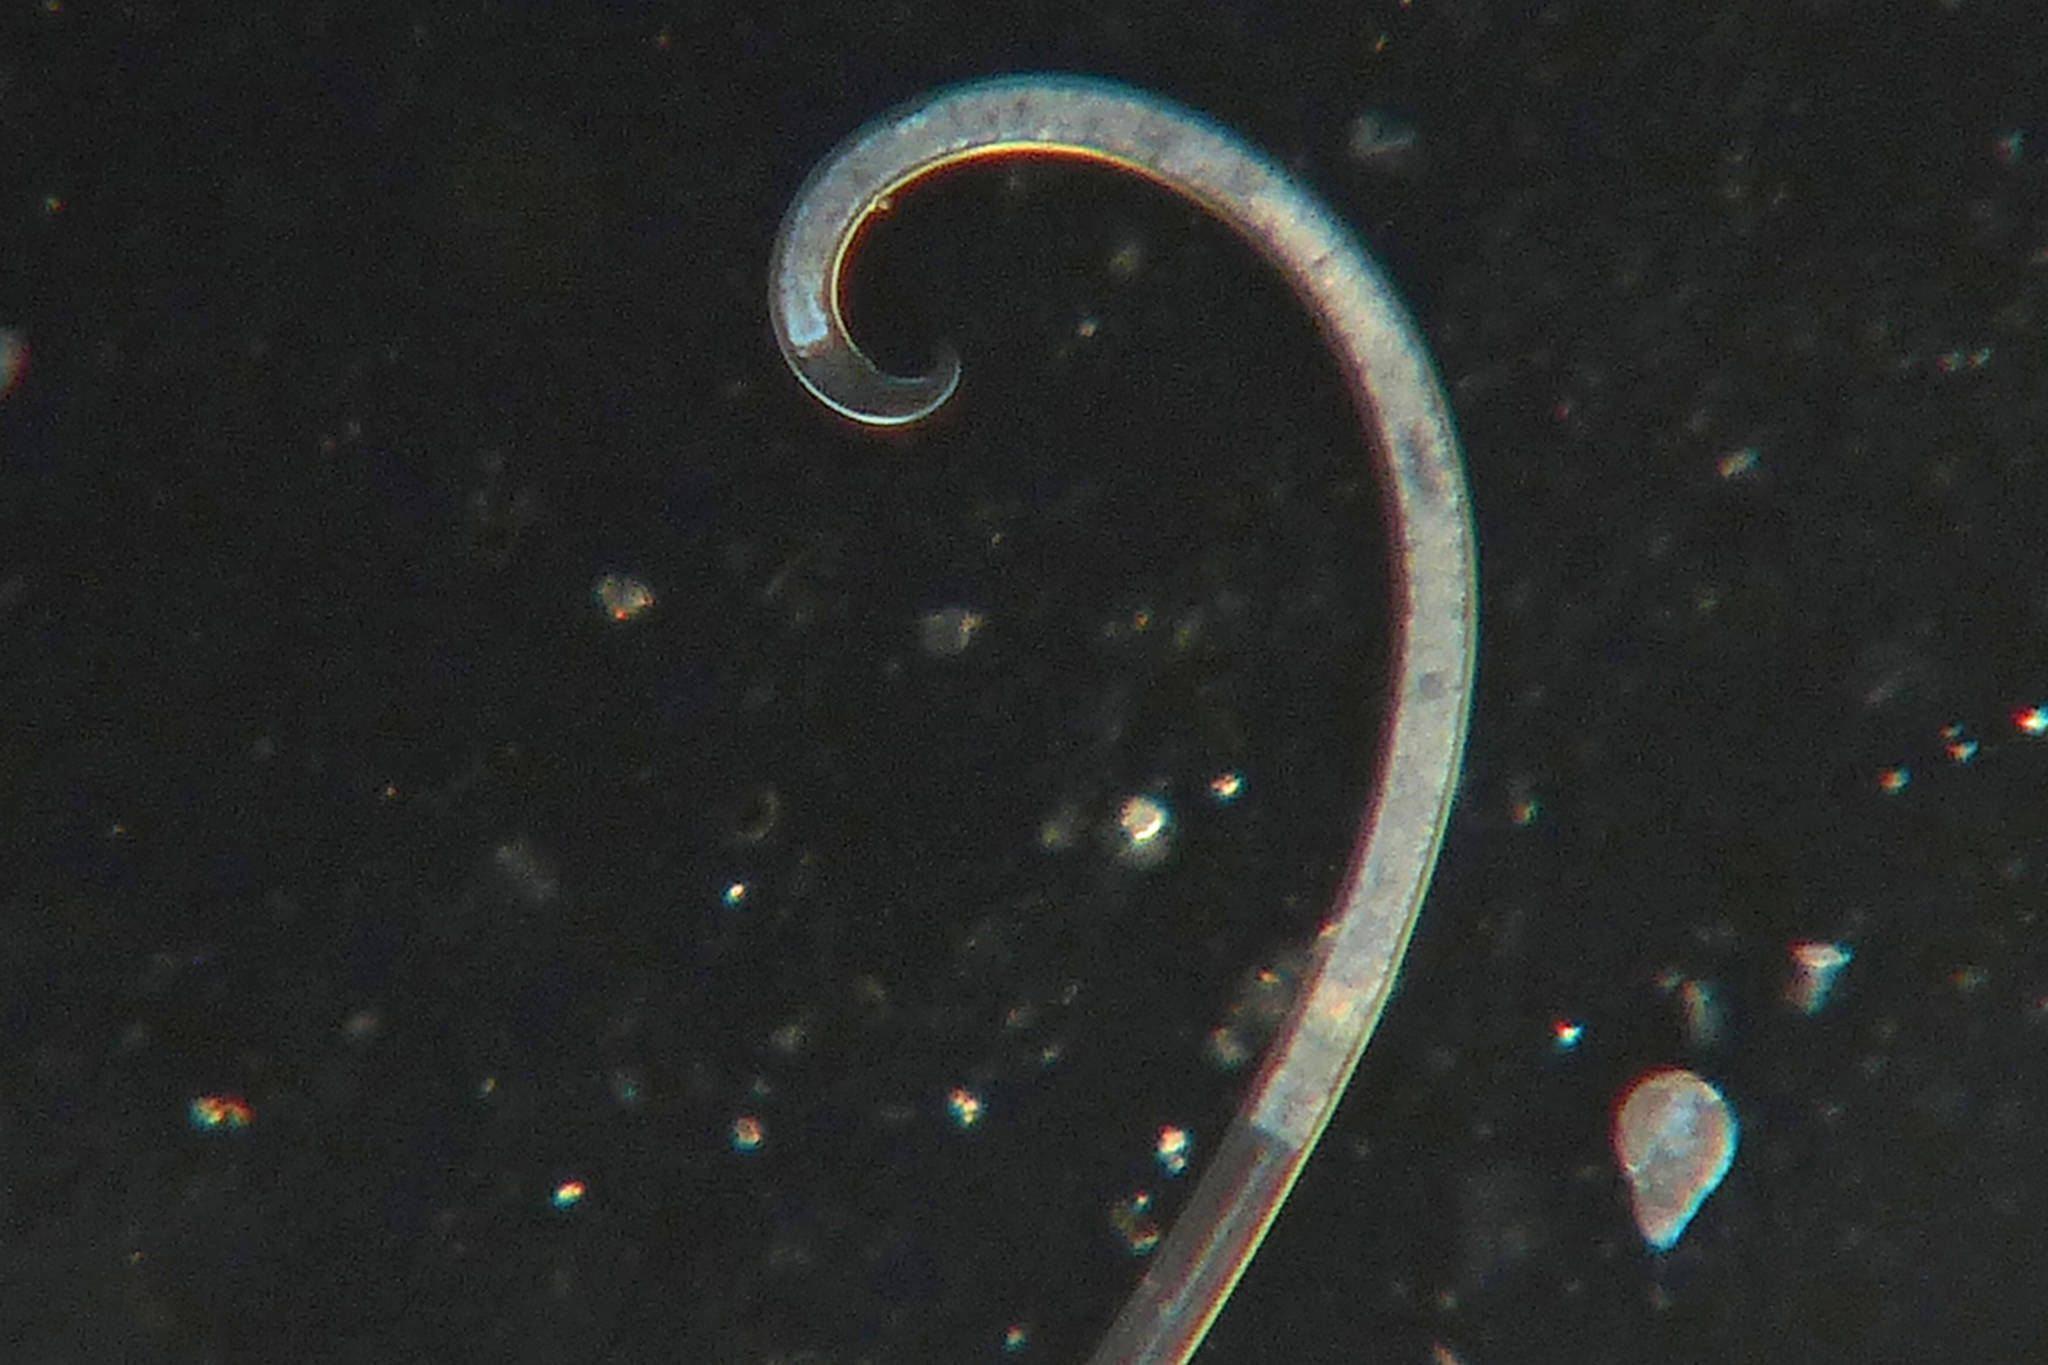 The story behind these ubiquitous round worms